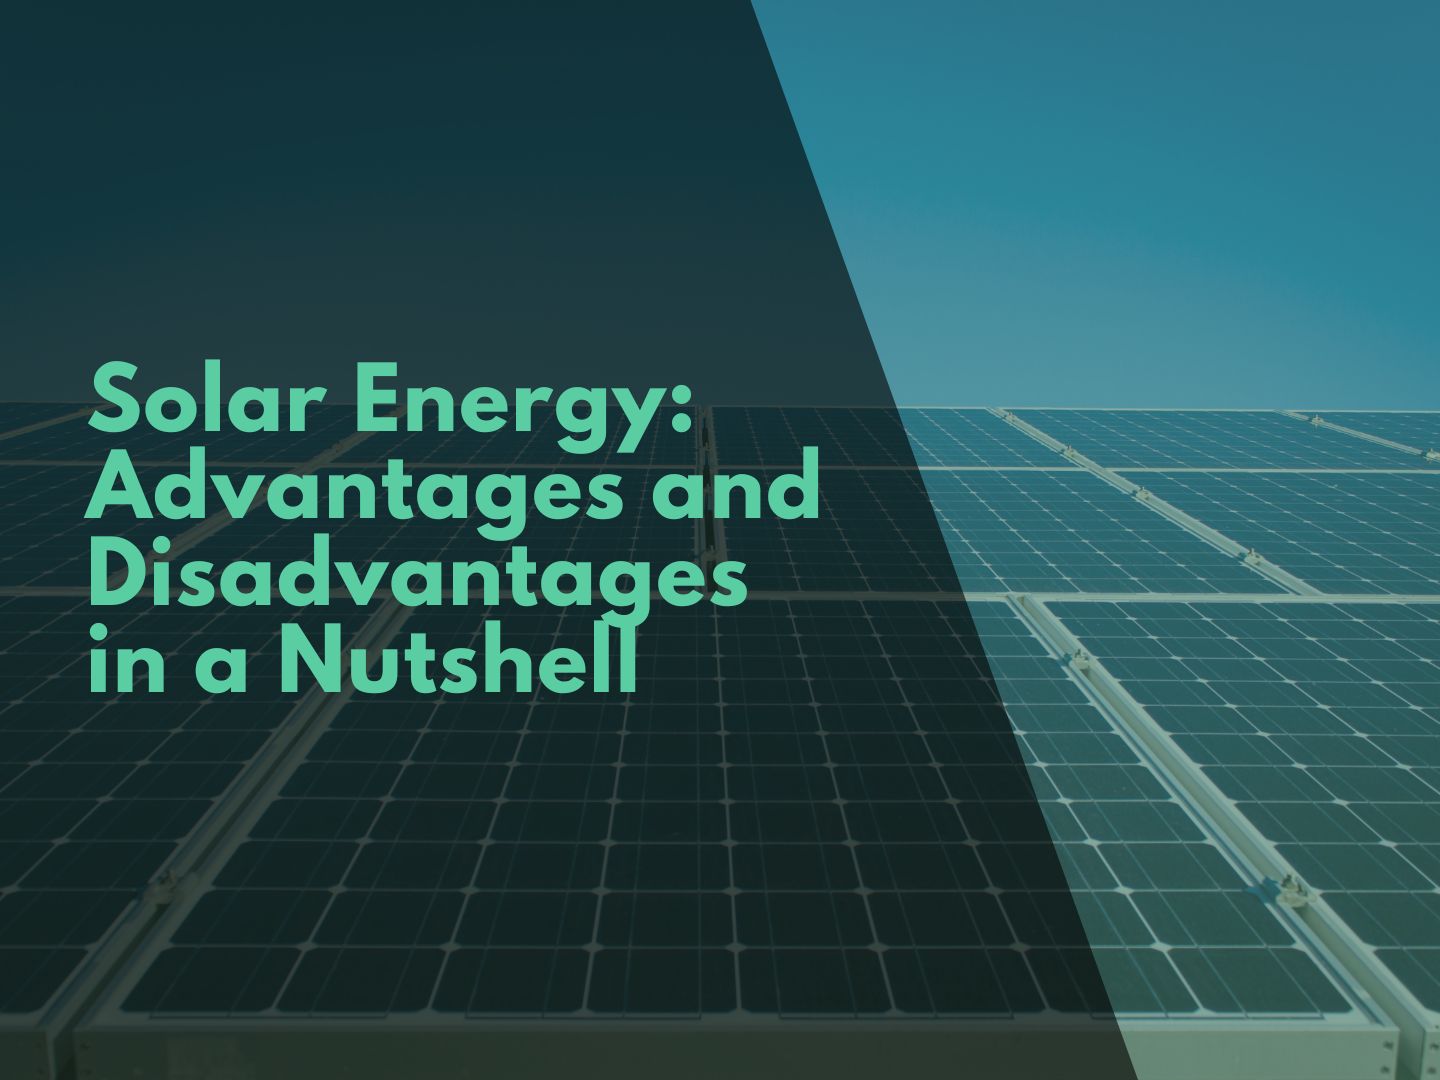 Solar Energy: Advantages and Disadvantages in a Nutshell